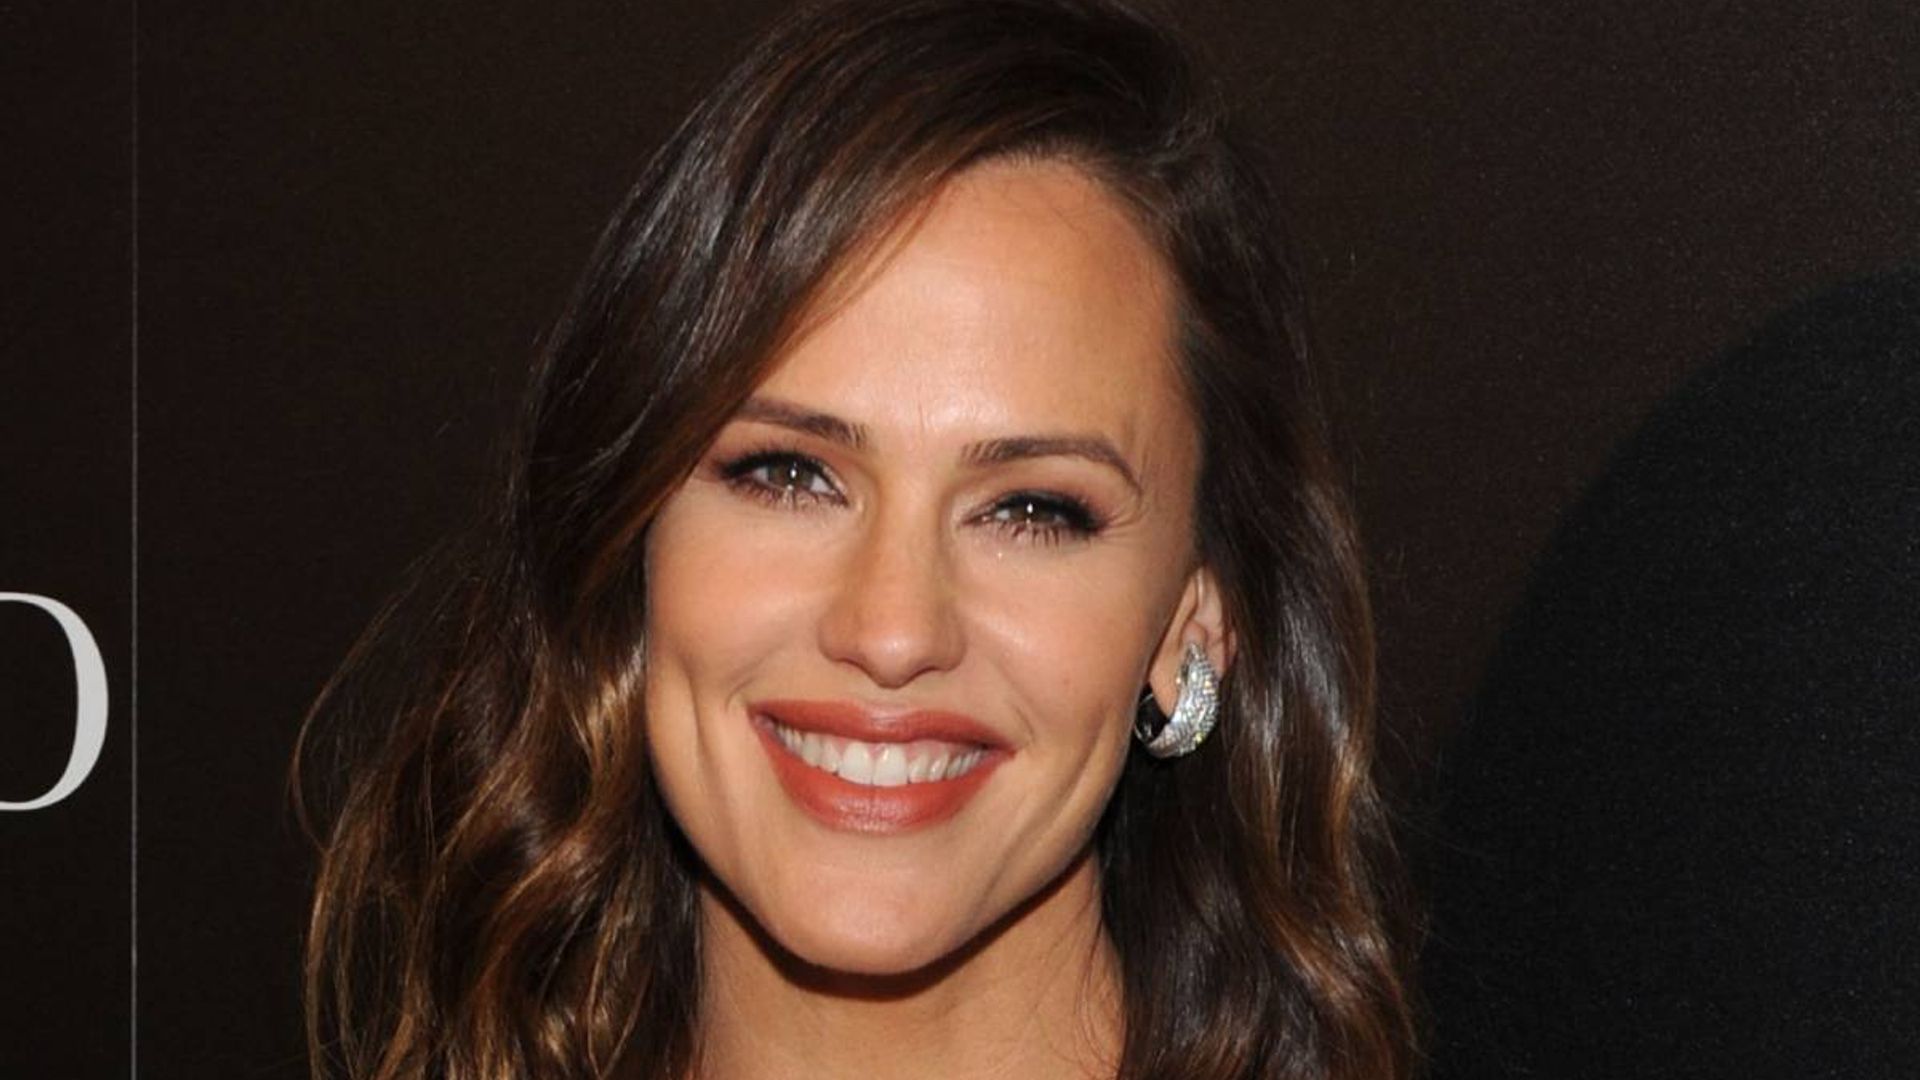 Jennifer Garner wows fans with new glimpse inside stylish family home